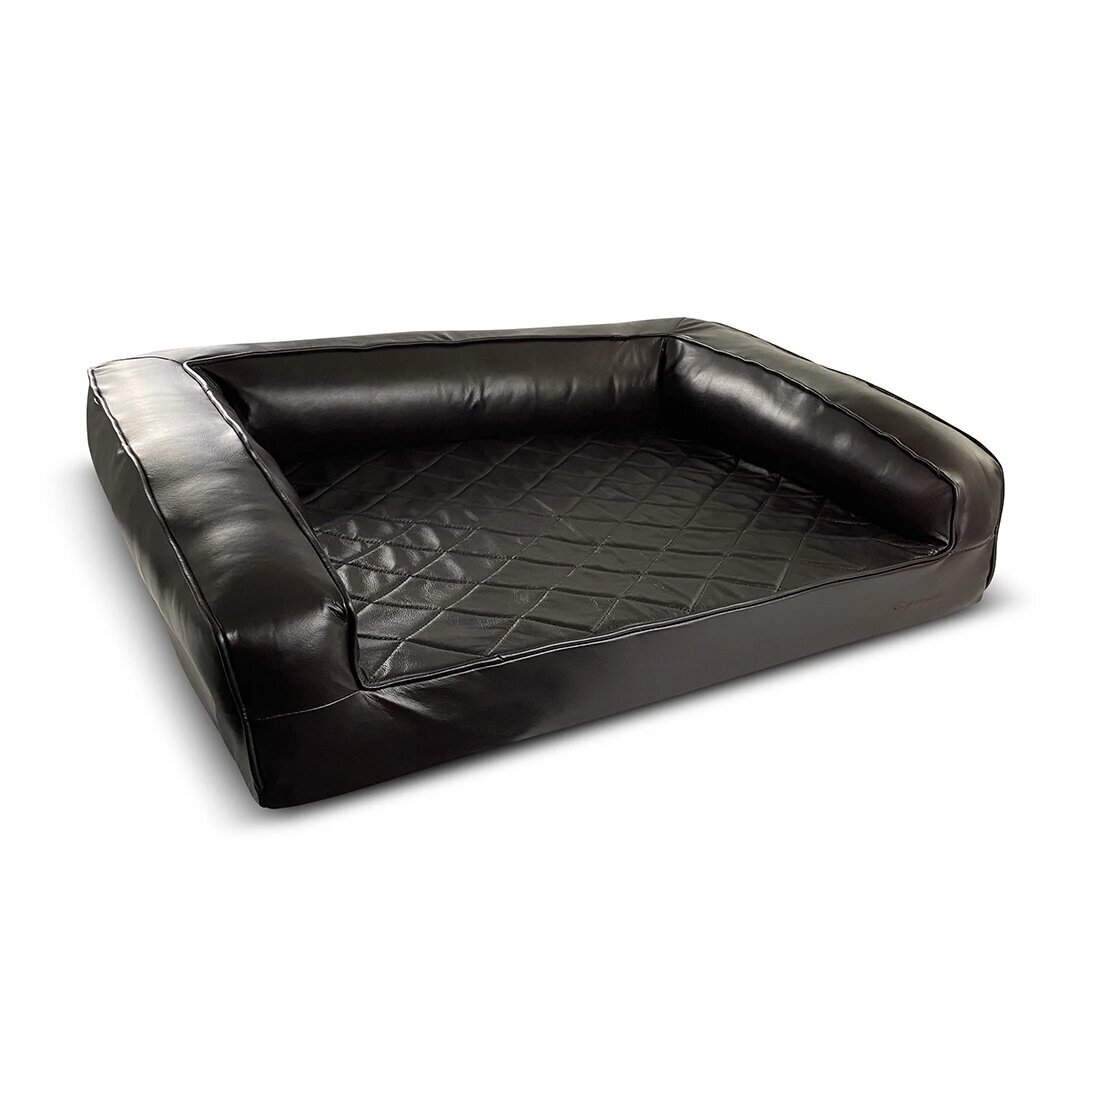 Leather bolster dog bed